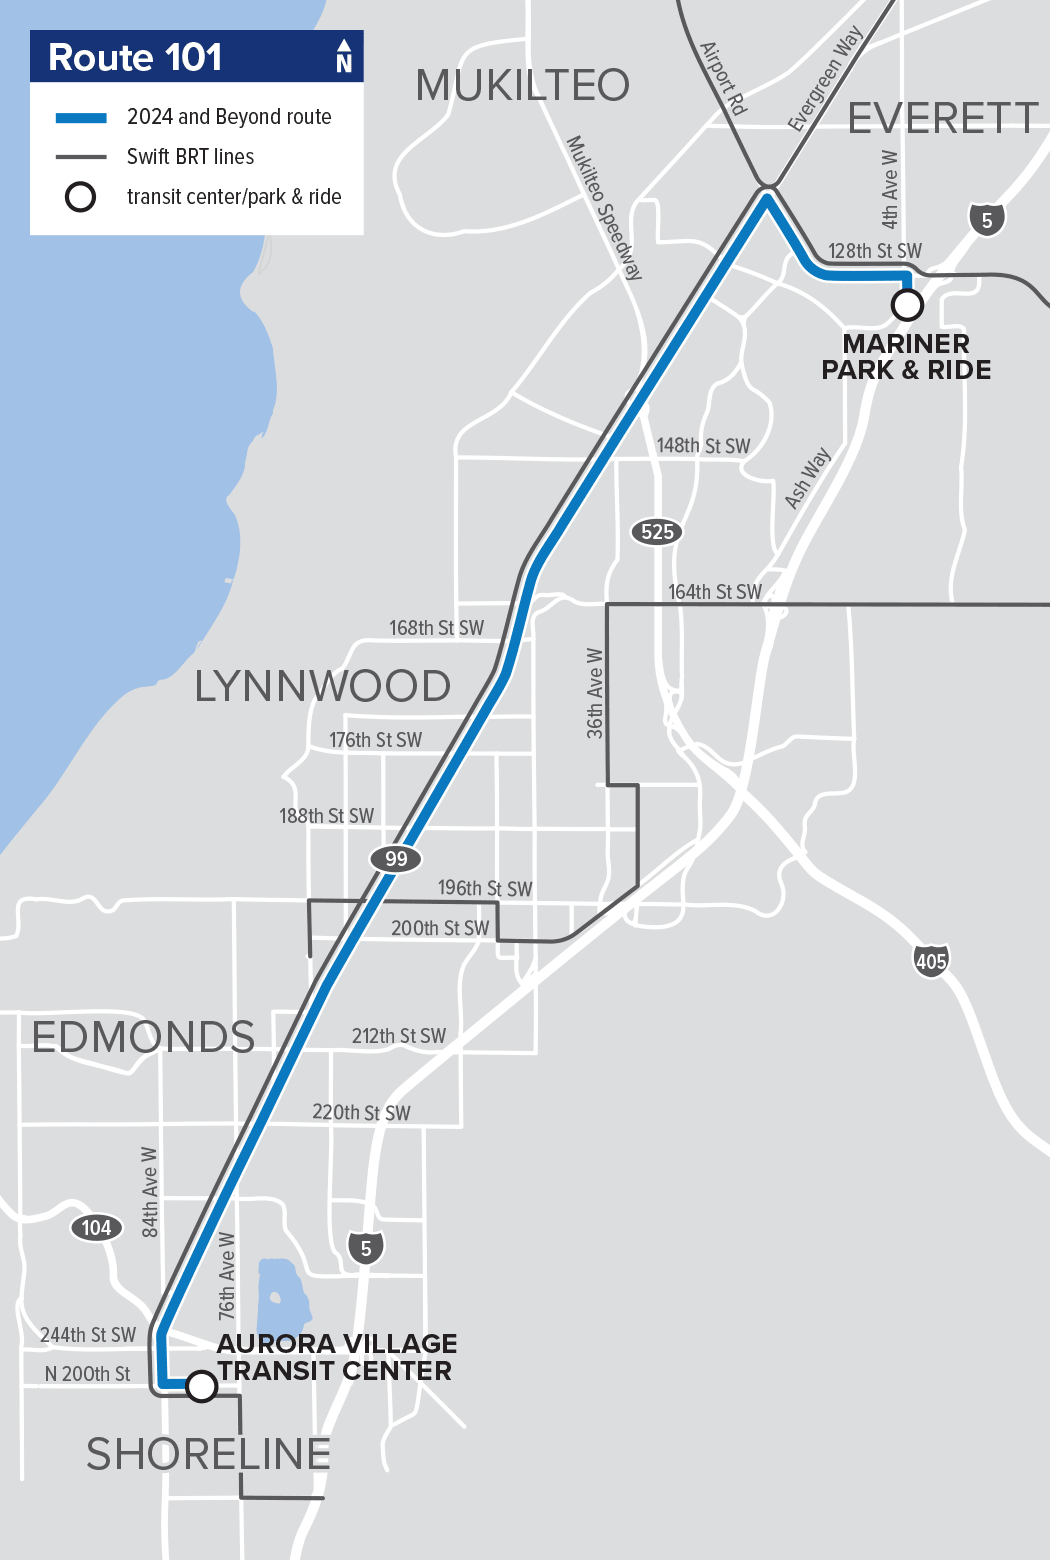 Transit Changes 2024 and Beyond: A map of Route 101 shows no changes for the route